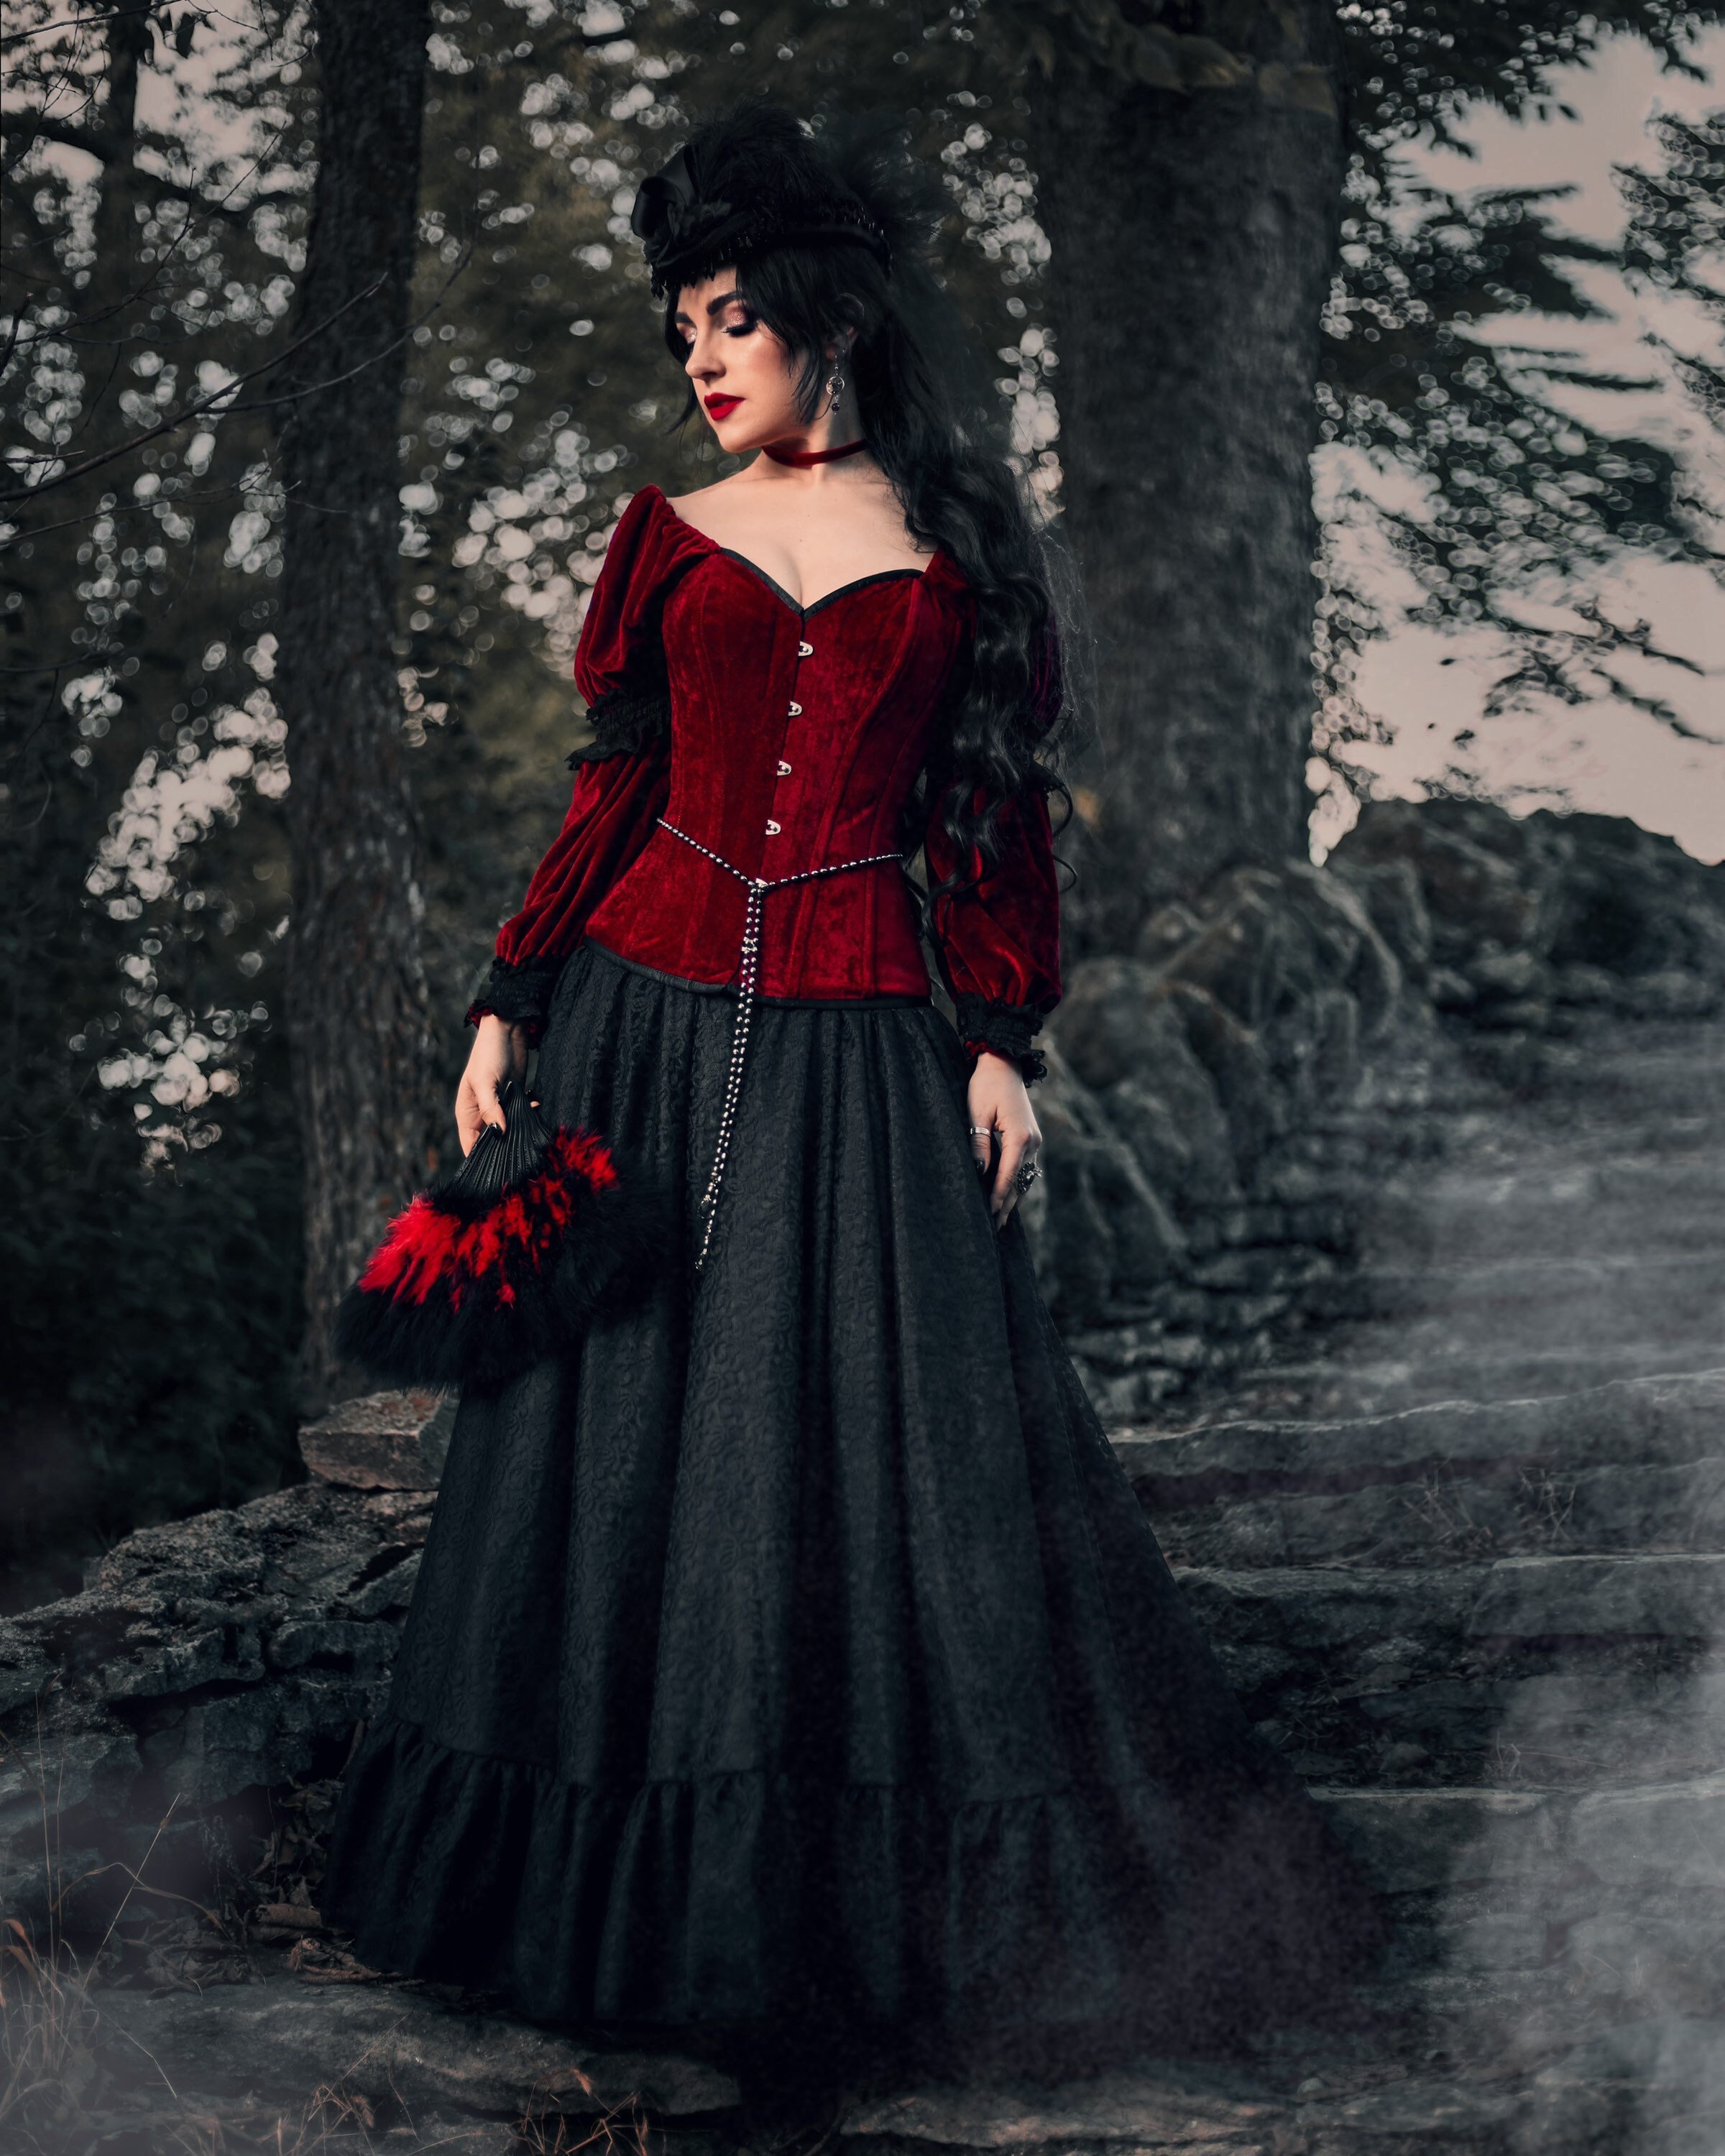 The Masquerade Gothic Victorian Velvet and Lace Vampire Gown Dress Corset  Costume Limited Edition 